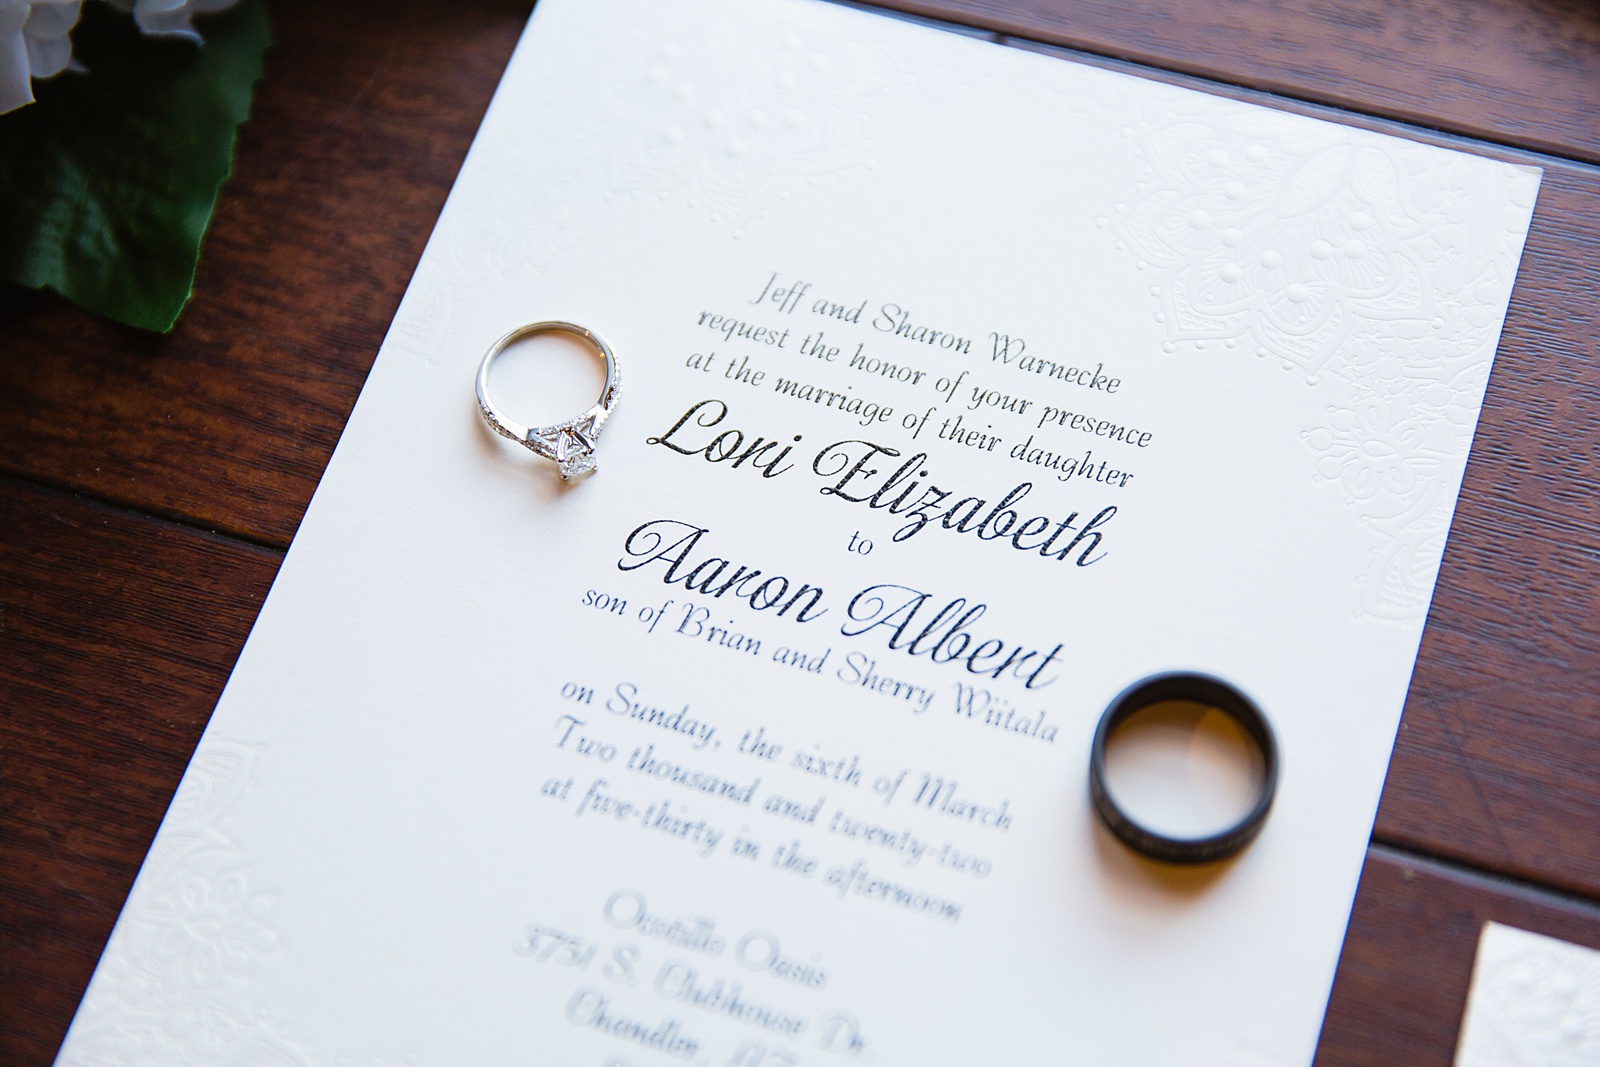 Bride and grooms wedding rings on top of classic wedding invitations by PMA Photography.